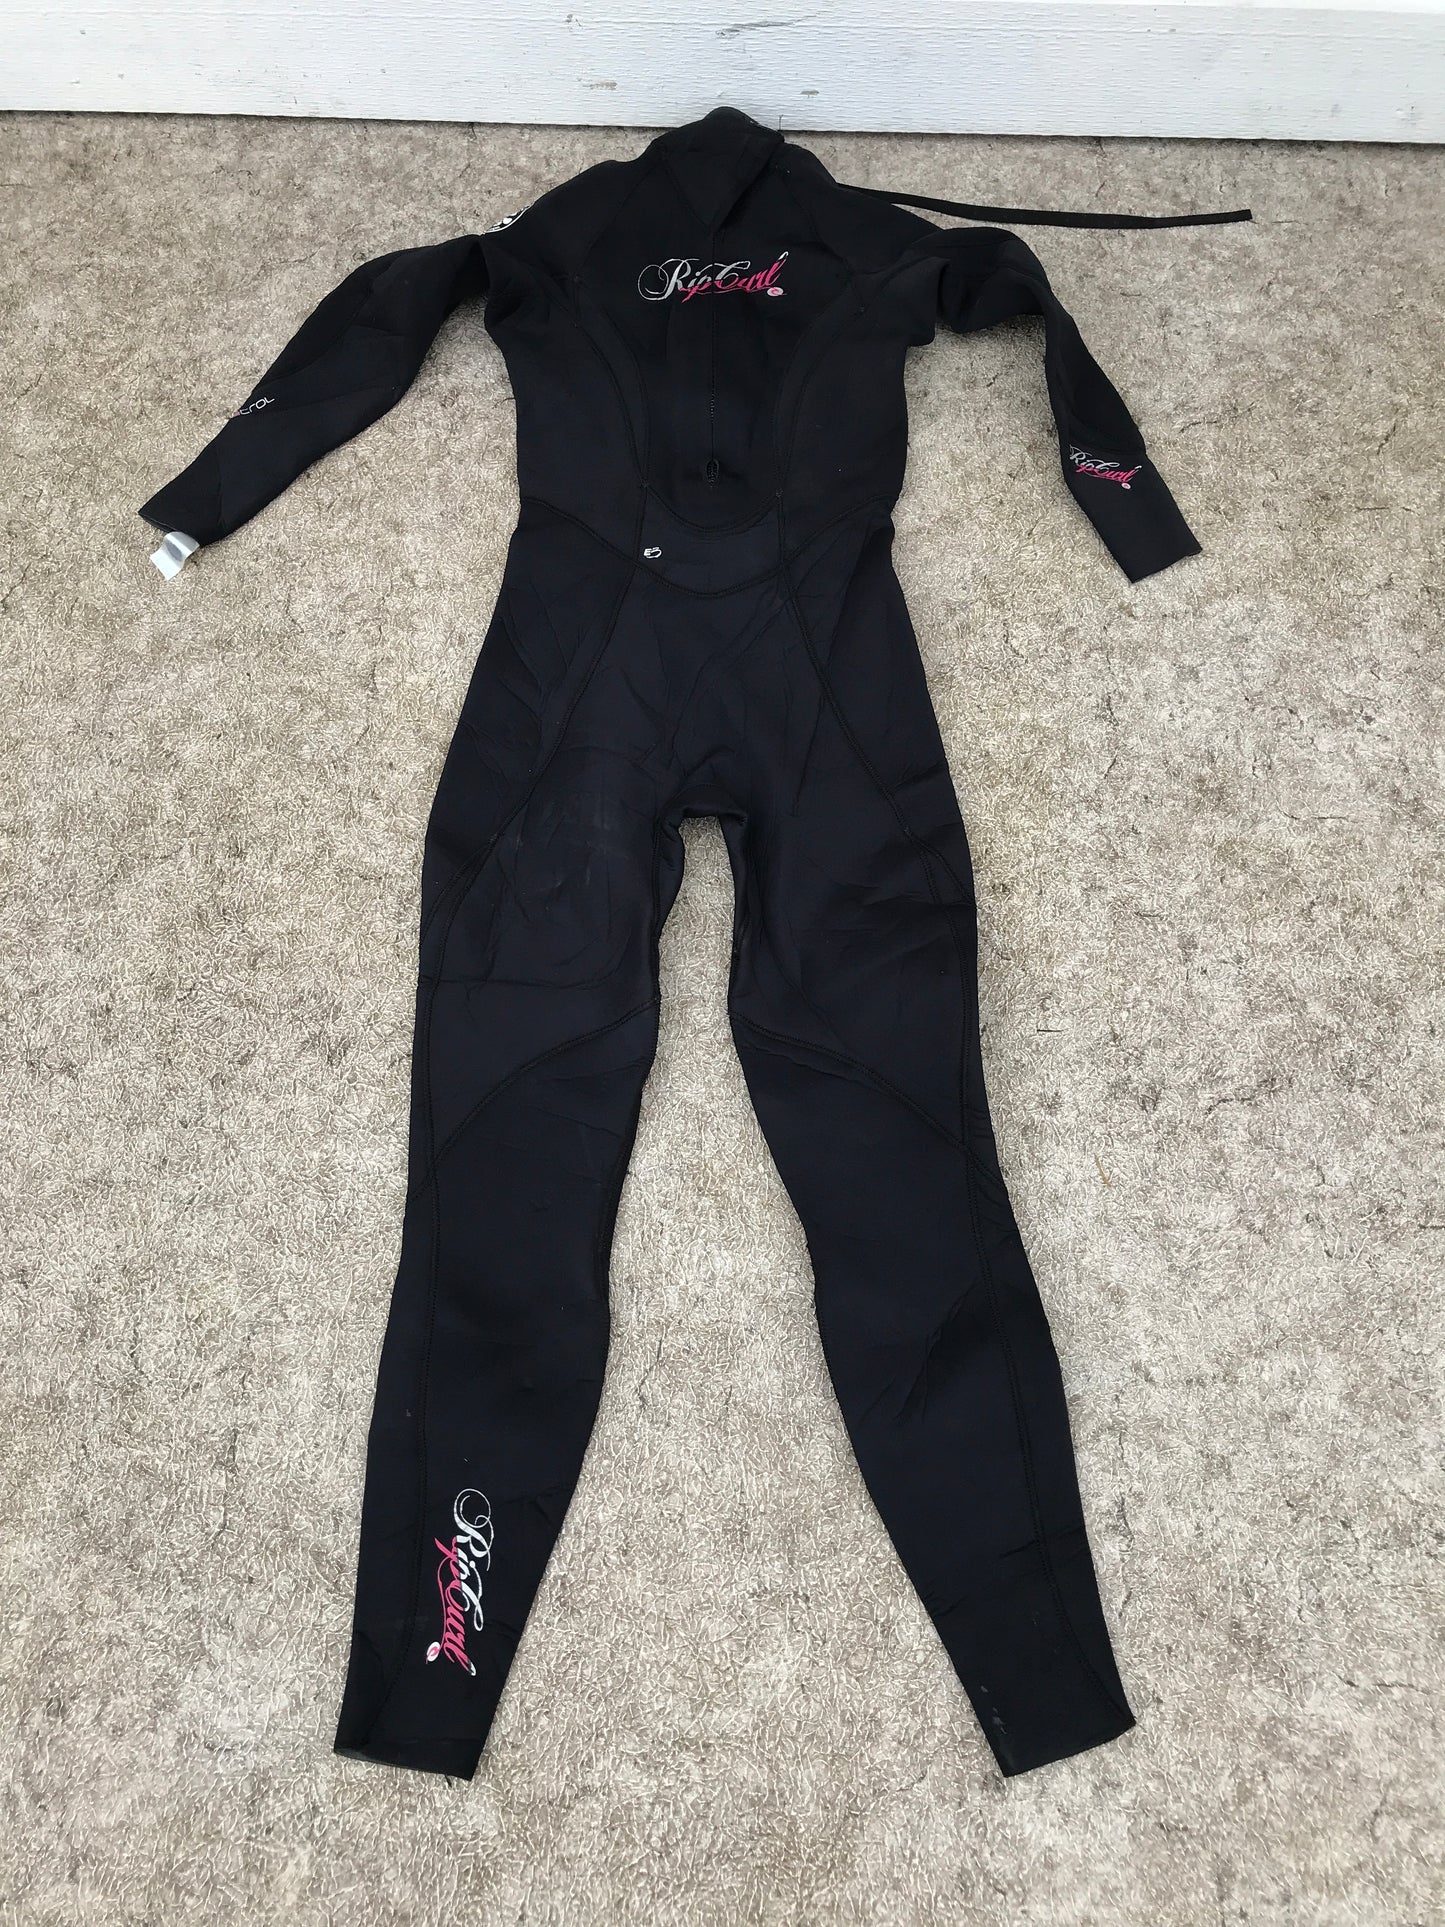 Wetsuit Full Women's Ladies Size 10 Ripcurl Dawn Patrol 3-2 mm Sealed Seams Thermal Linining Epic Stretch Like New